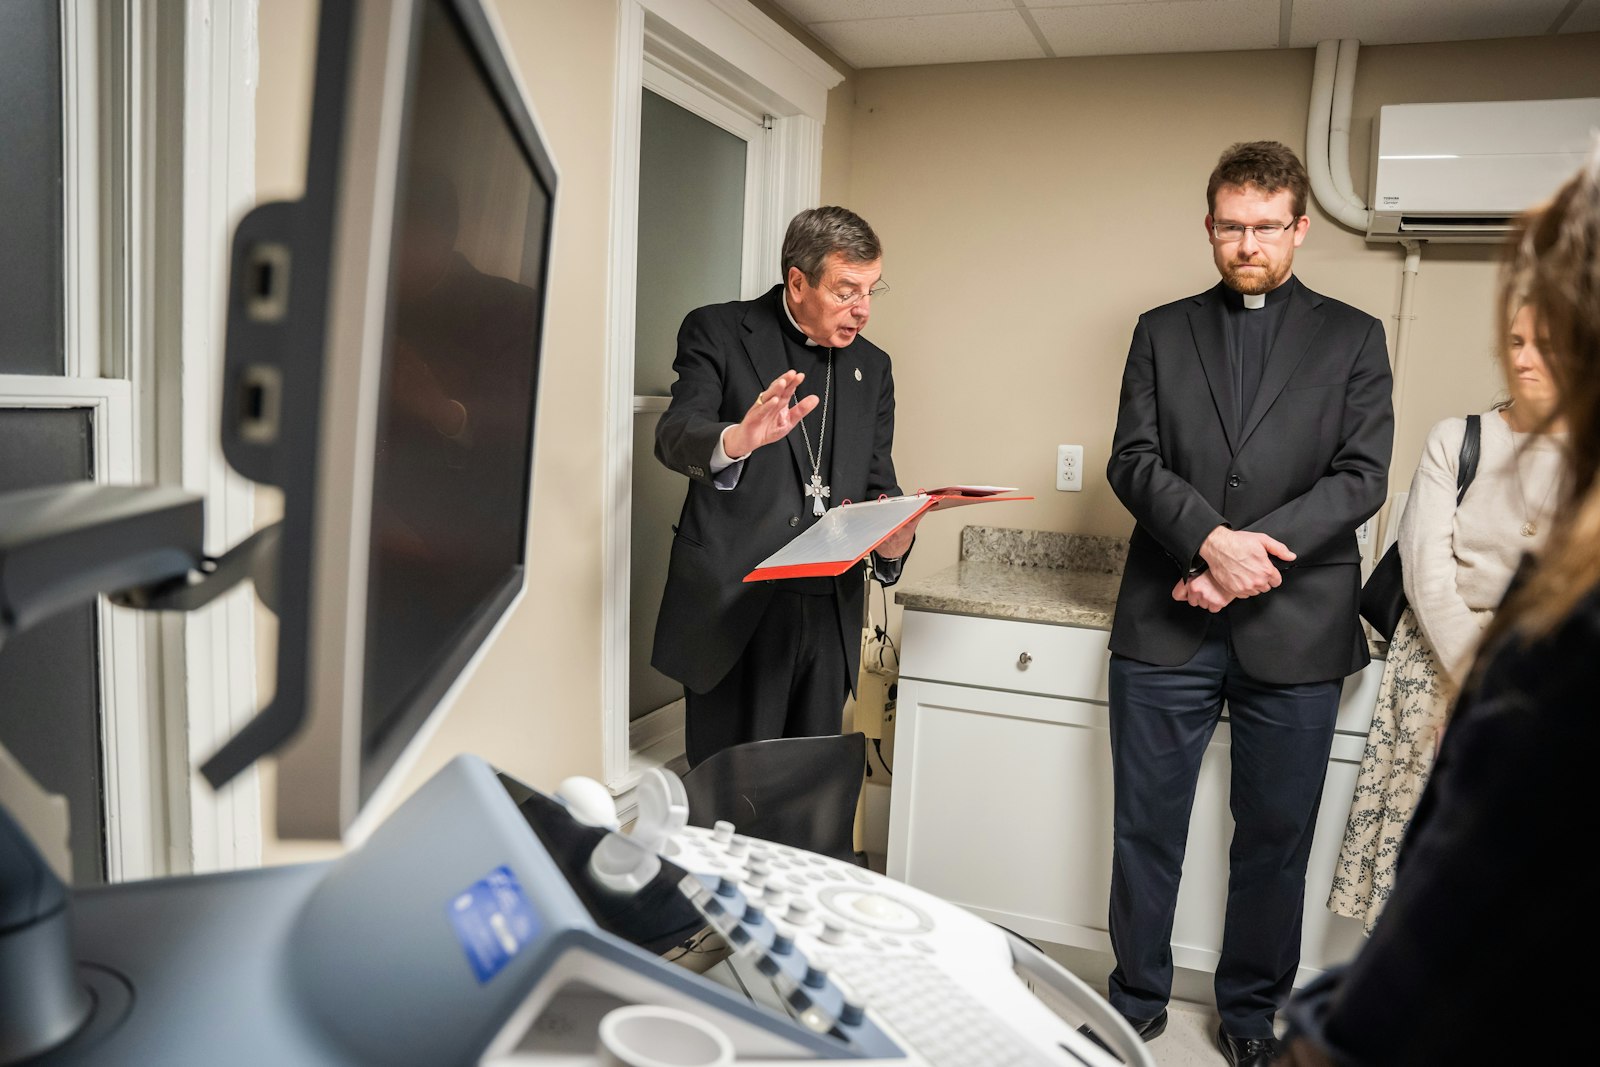 Archbishop Vigneron blesses the clinic's new ultrasound machine donated by Knights of Columbus Council 2950 from St. Lawrence Parish in Utica.